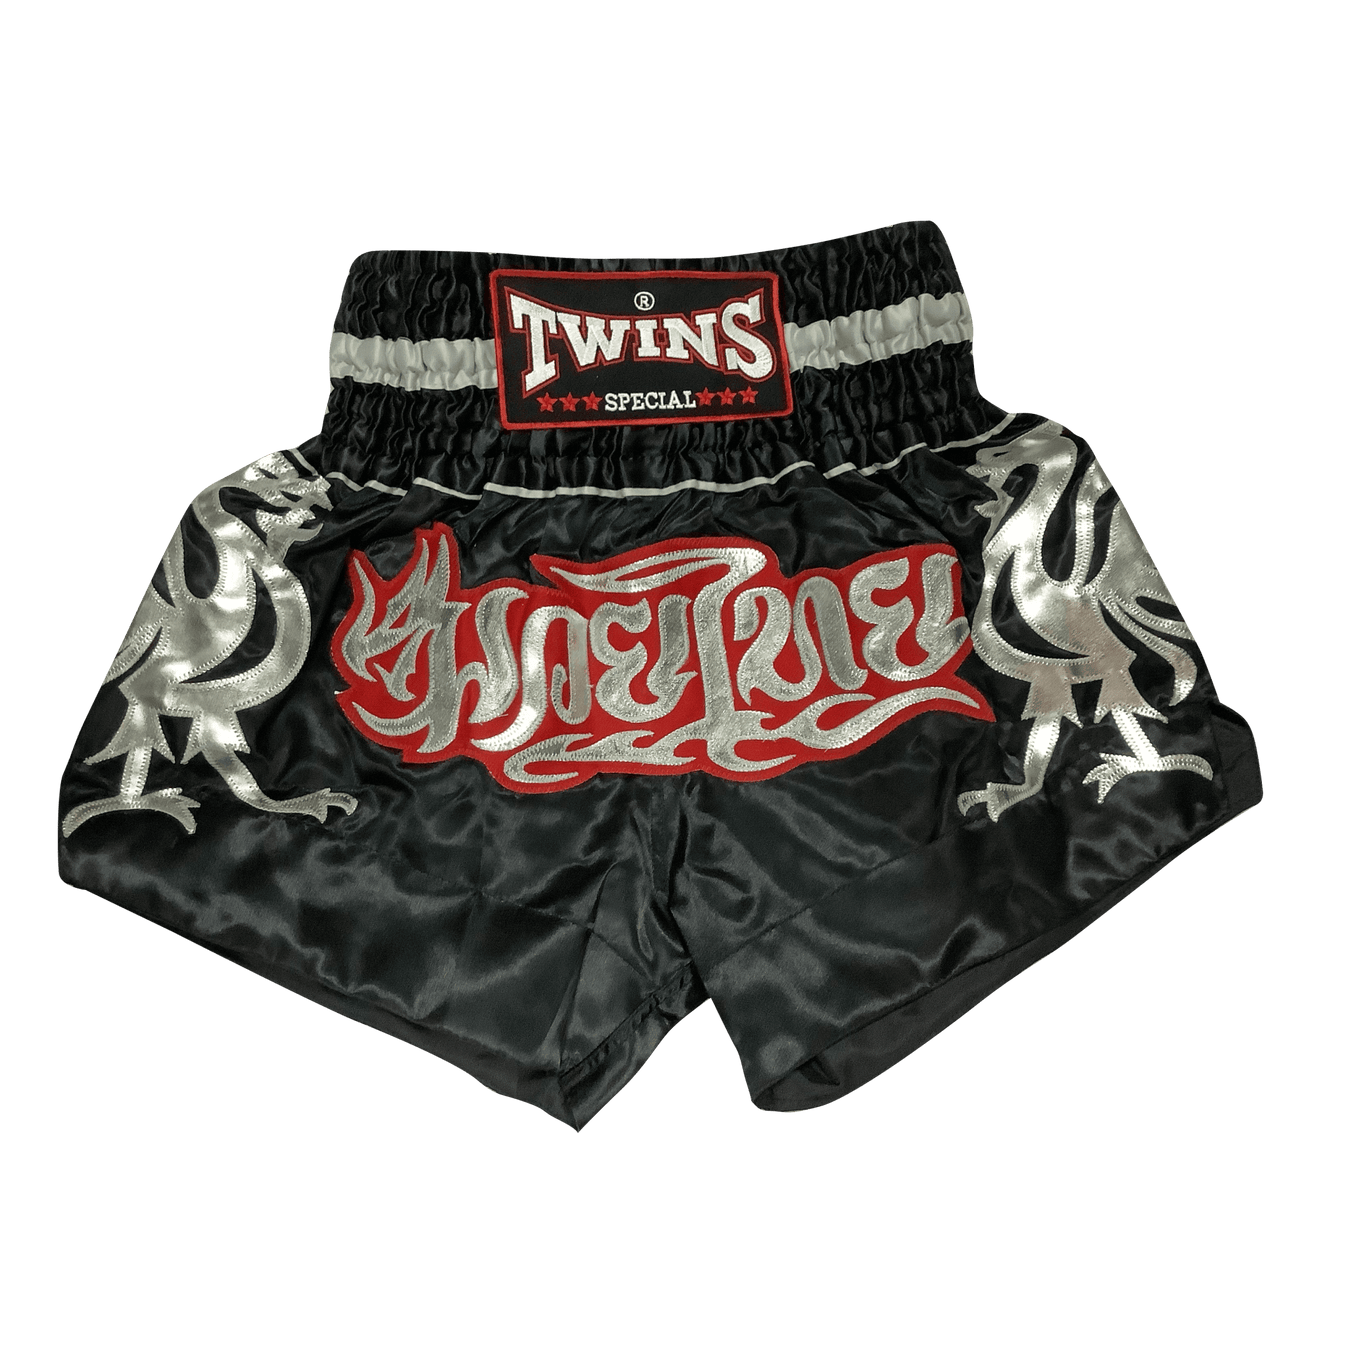 Twins Special Shorts T-153 Black Silver